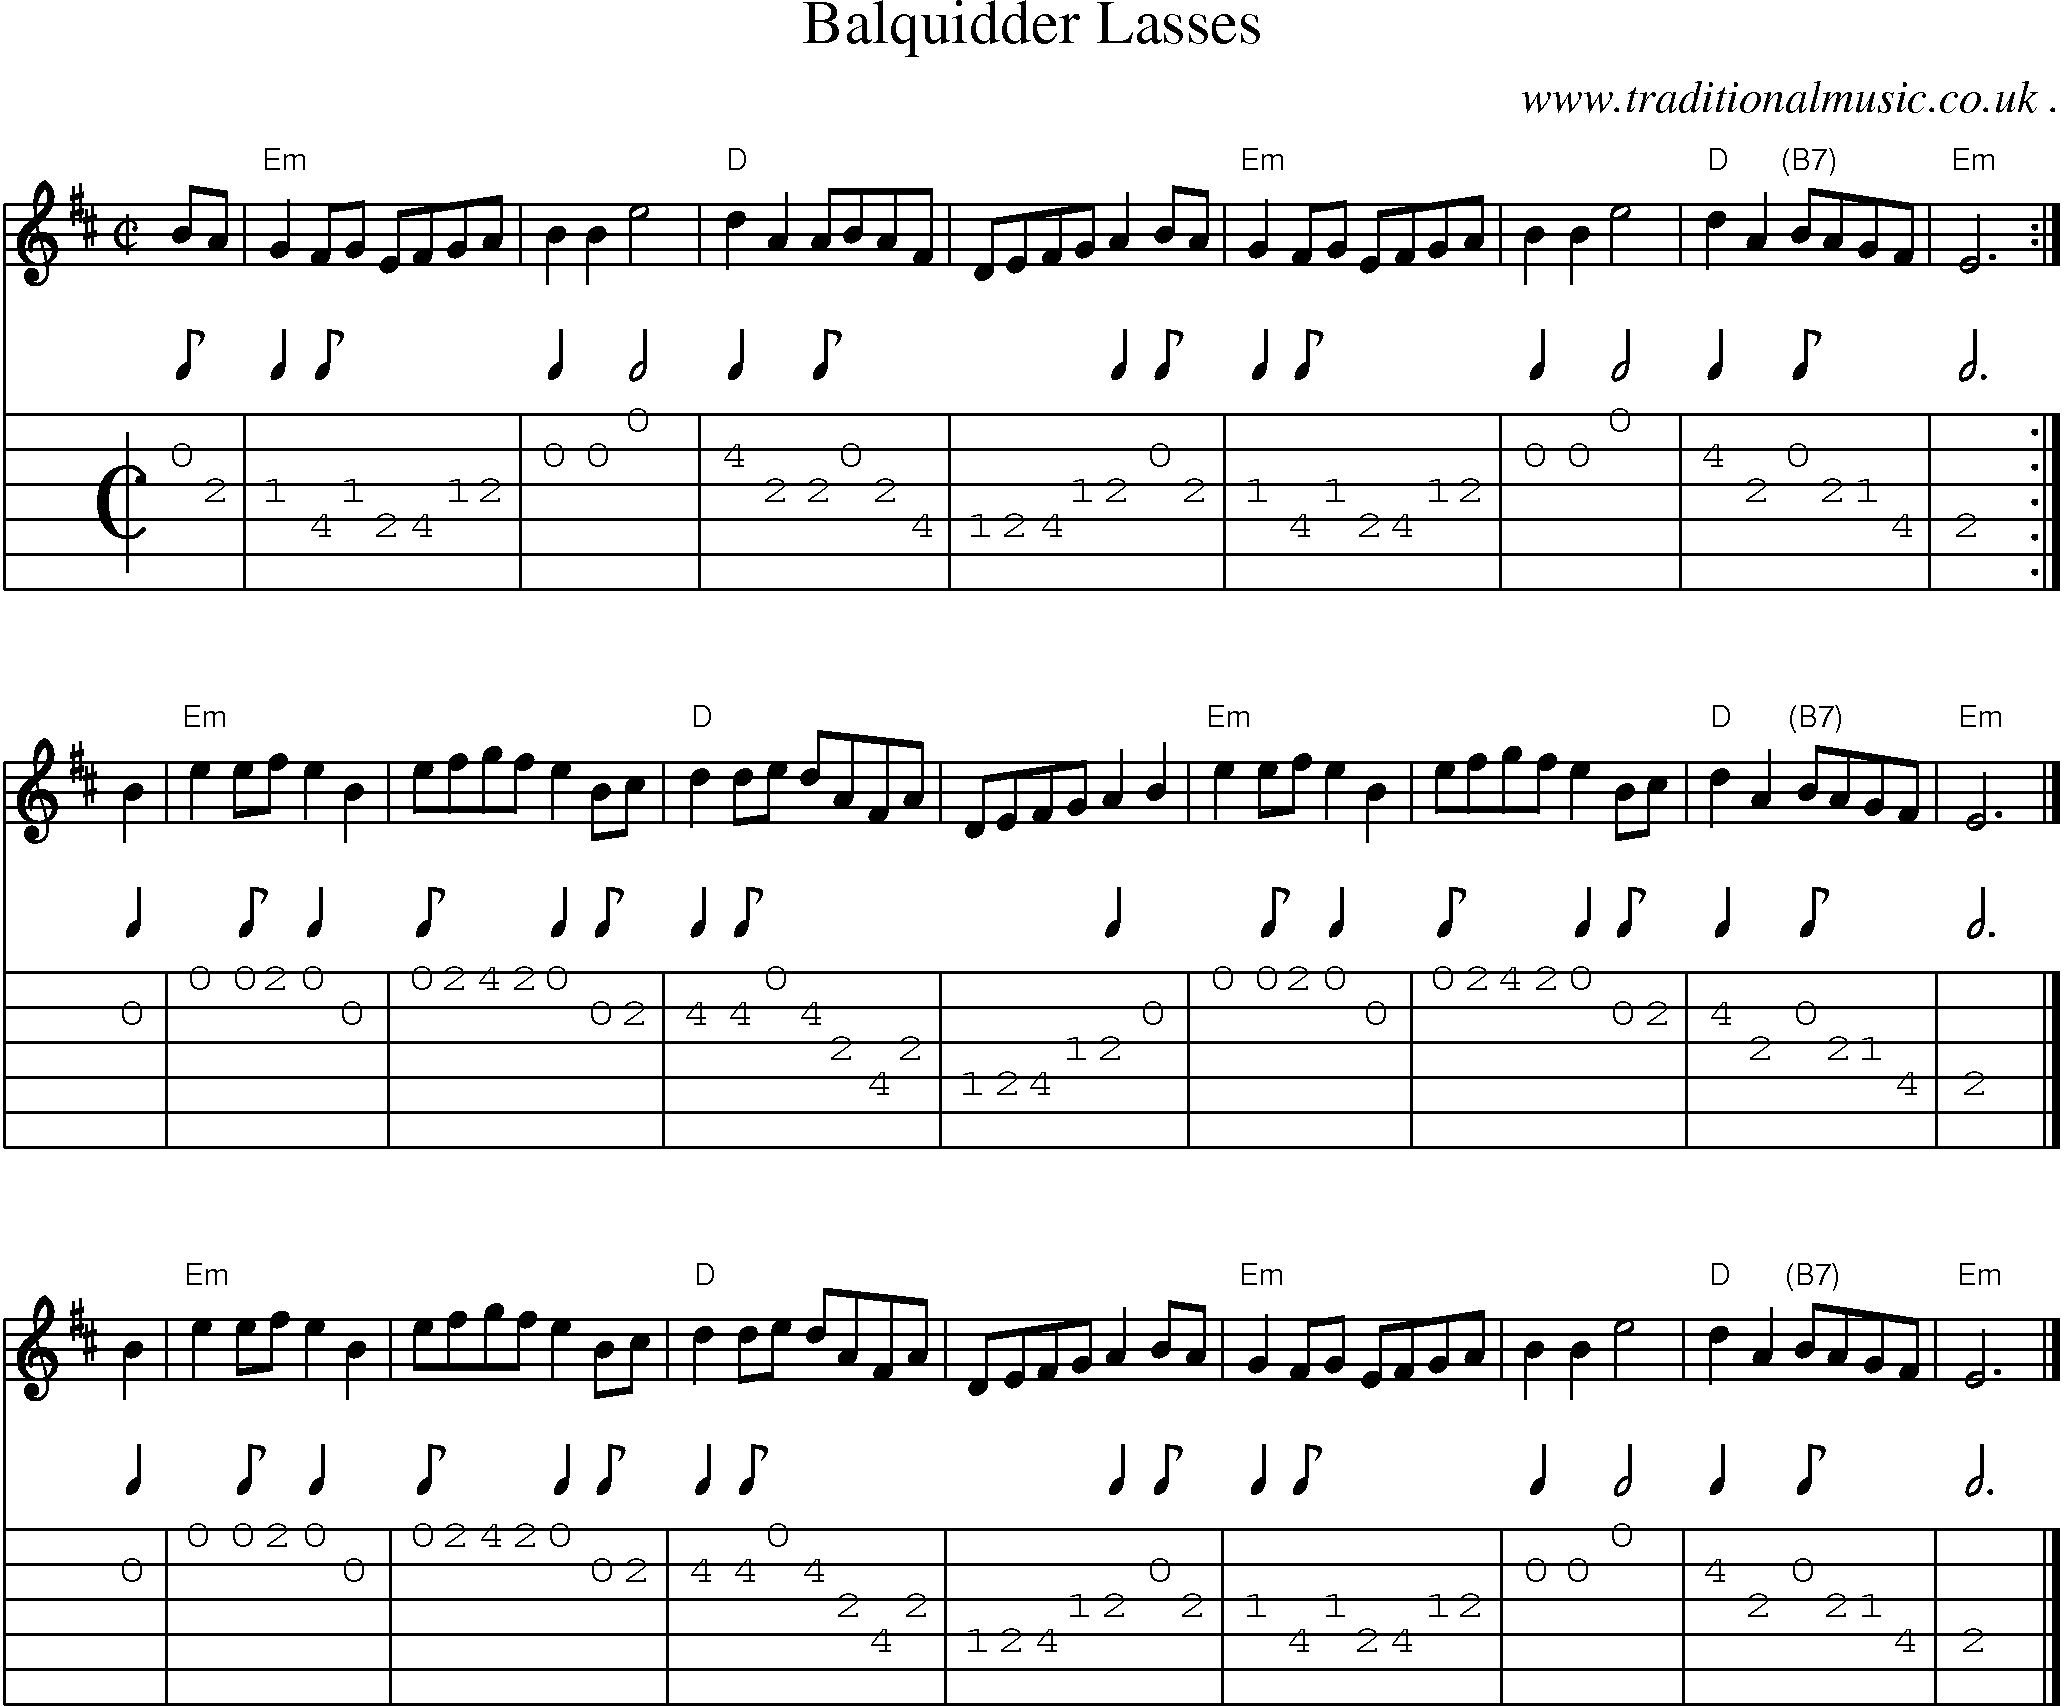 Sheet-music  score, Chords and Guitar Tabs for Balquidder Lasses